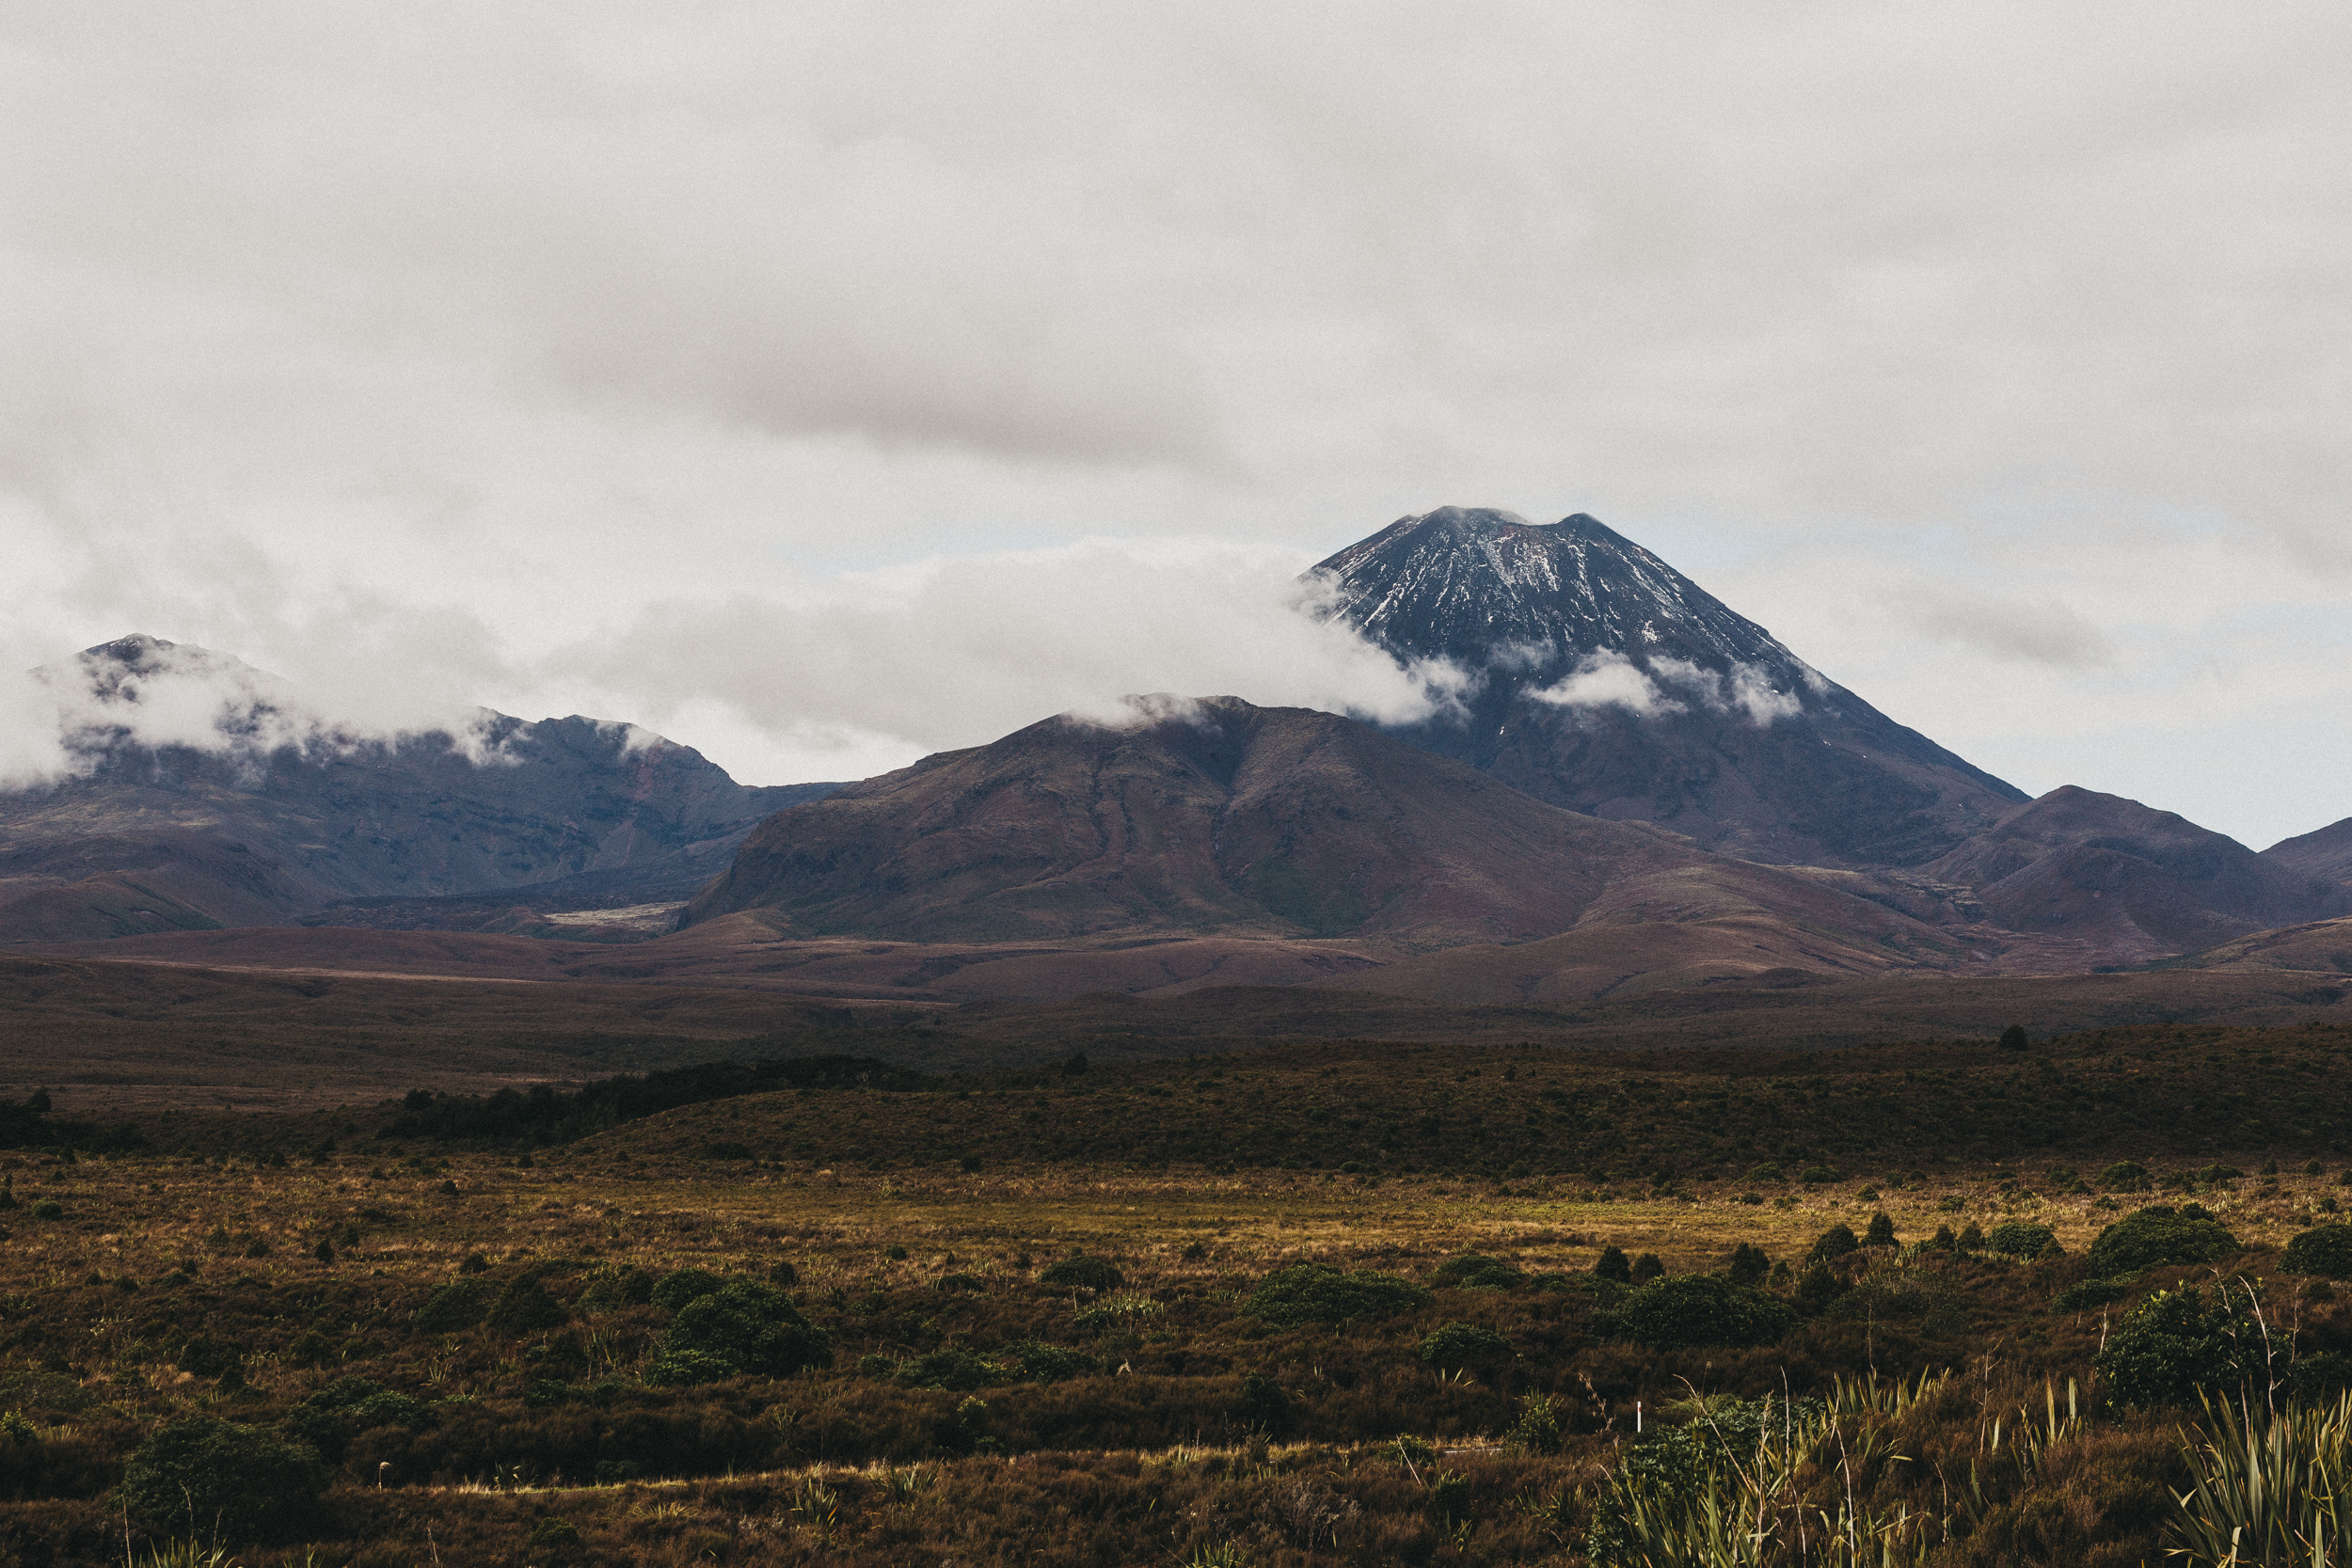 Day Five: driving past the volcanos that we were walking around with no visibility the day before!